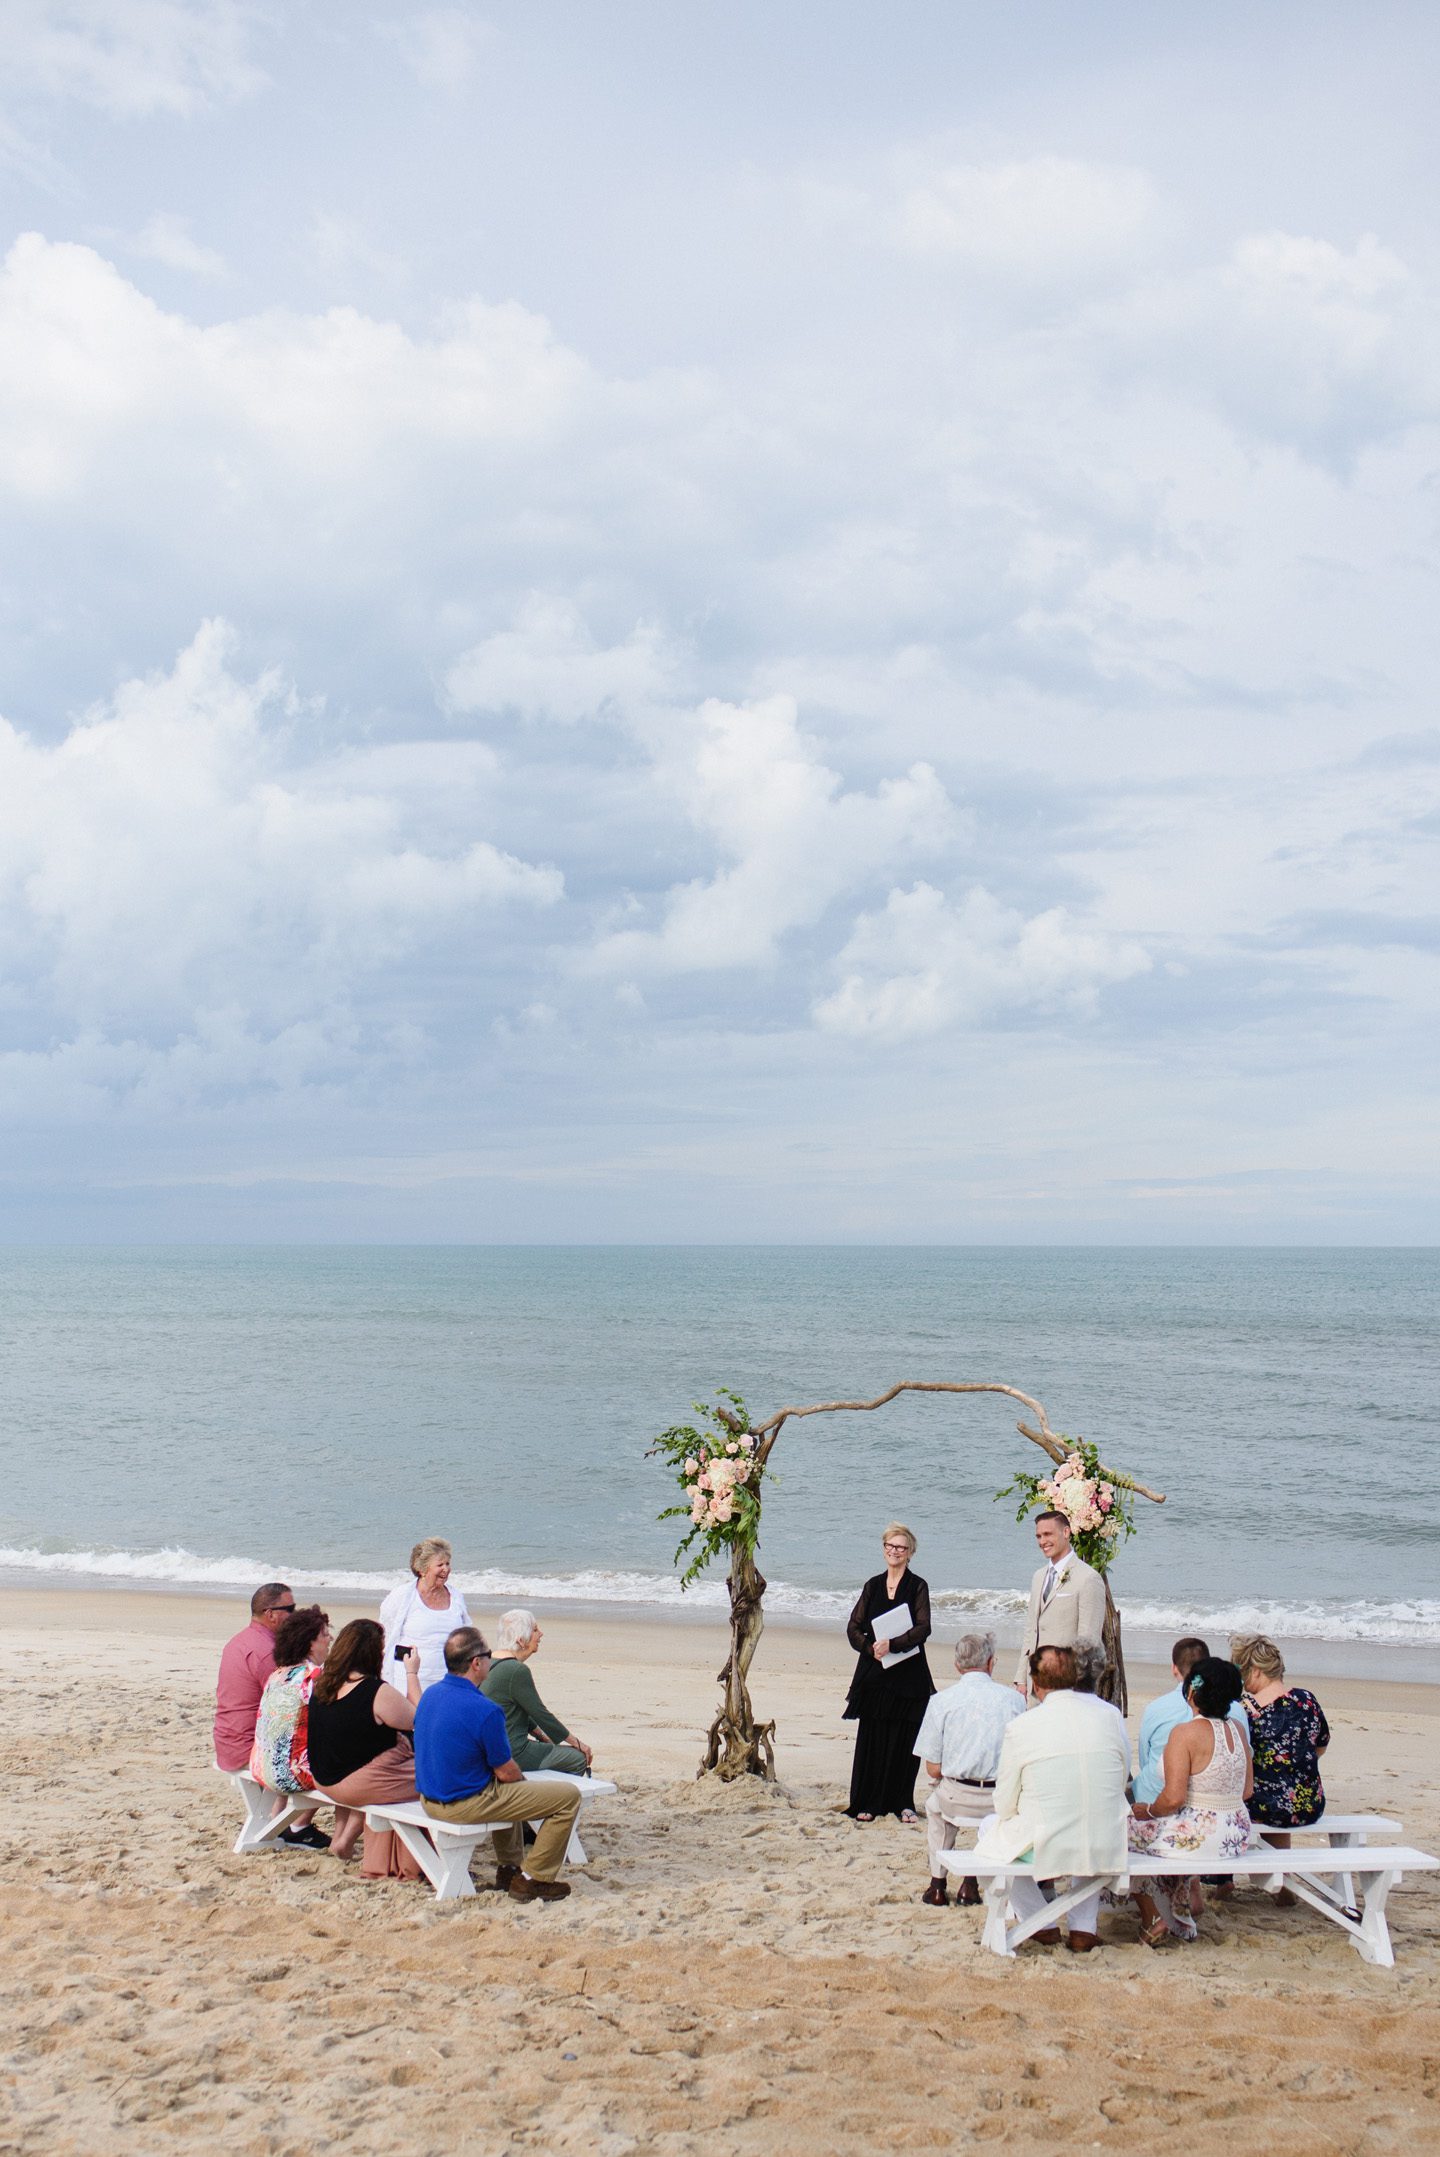 Outer Banks Wedding Photographers Neil GT Photography Palmers Island Beach Elopement Beach Ceremony